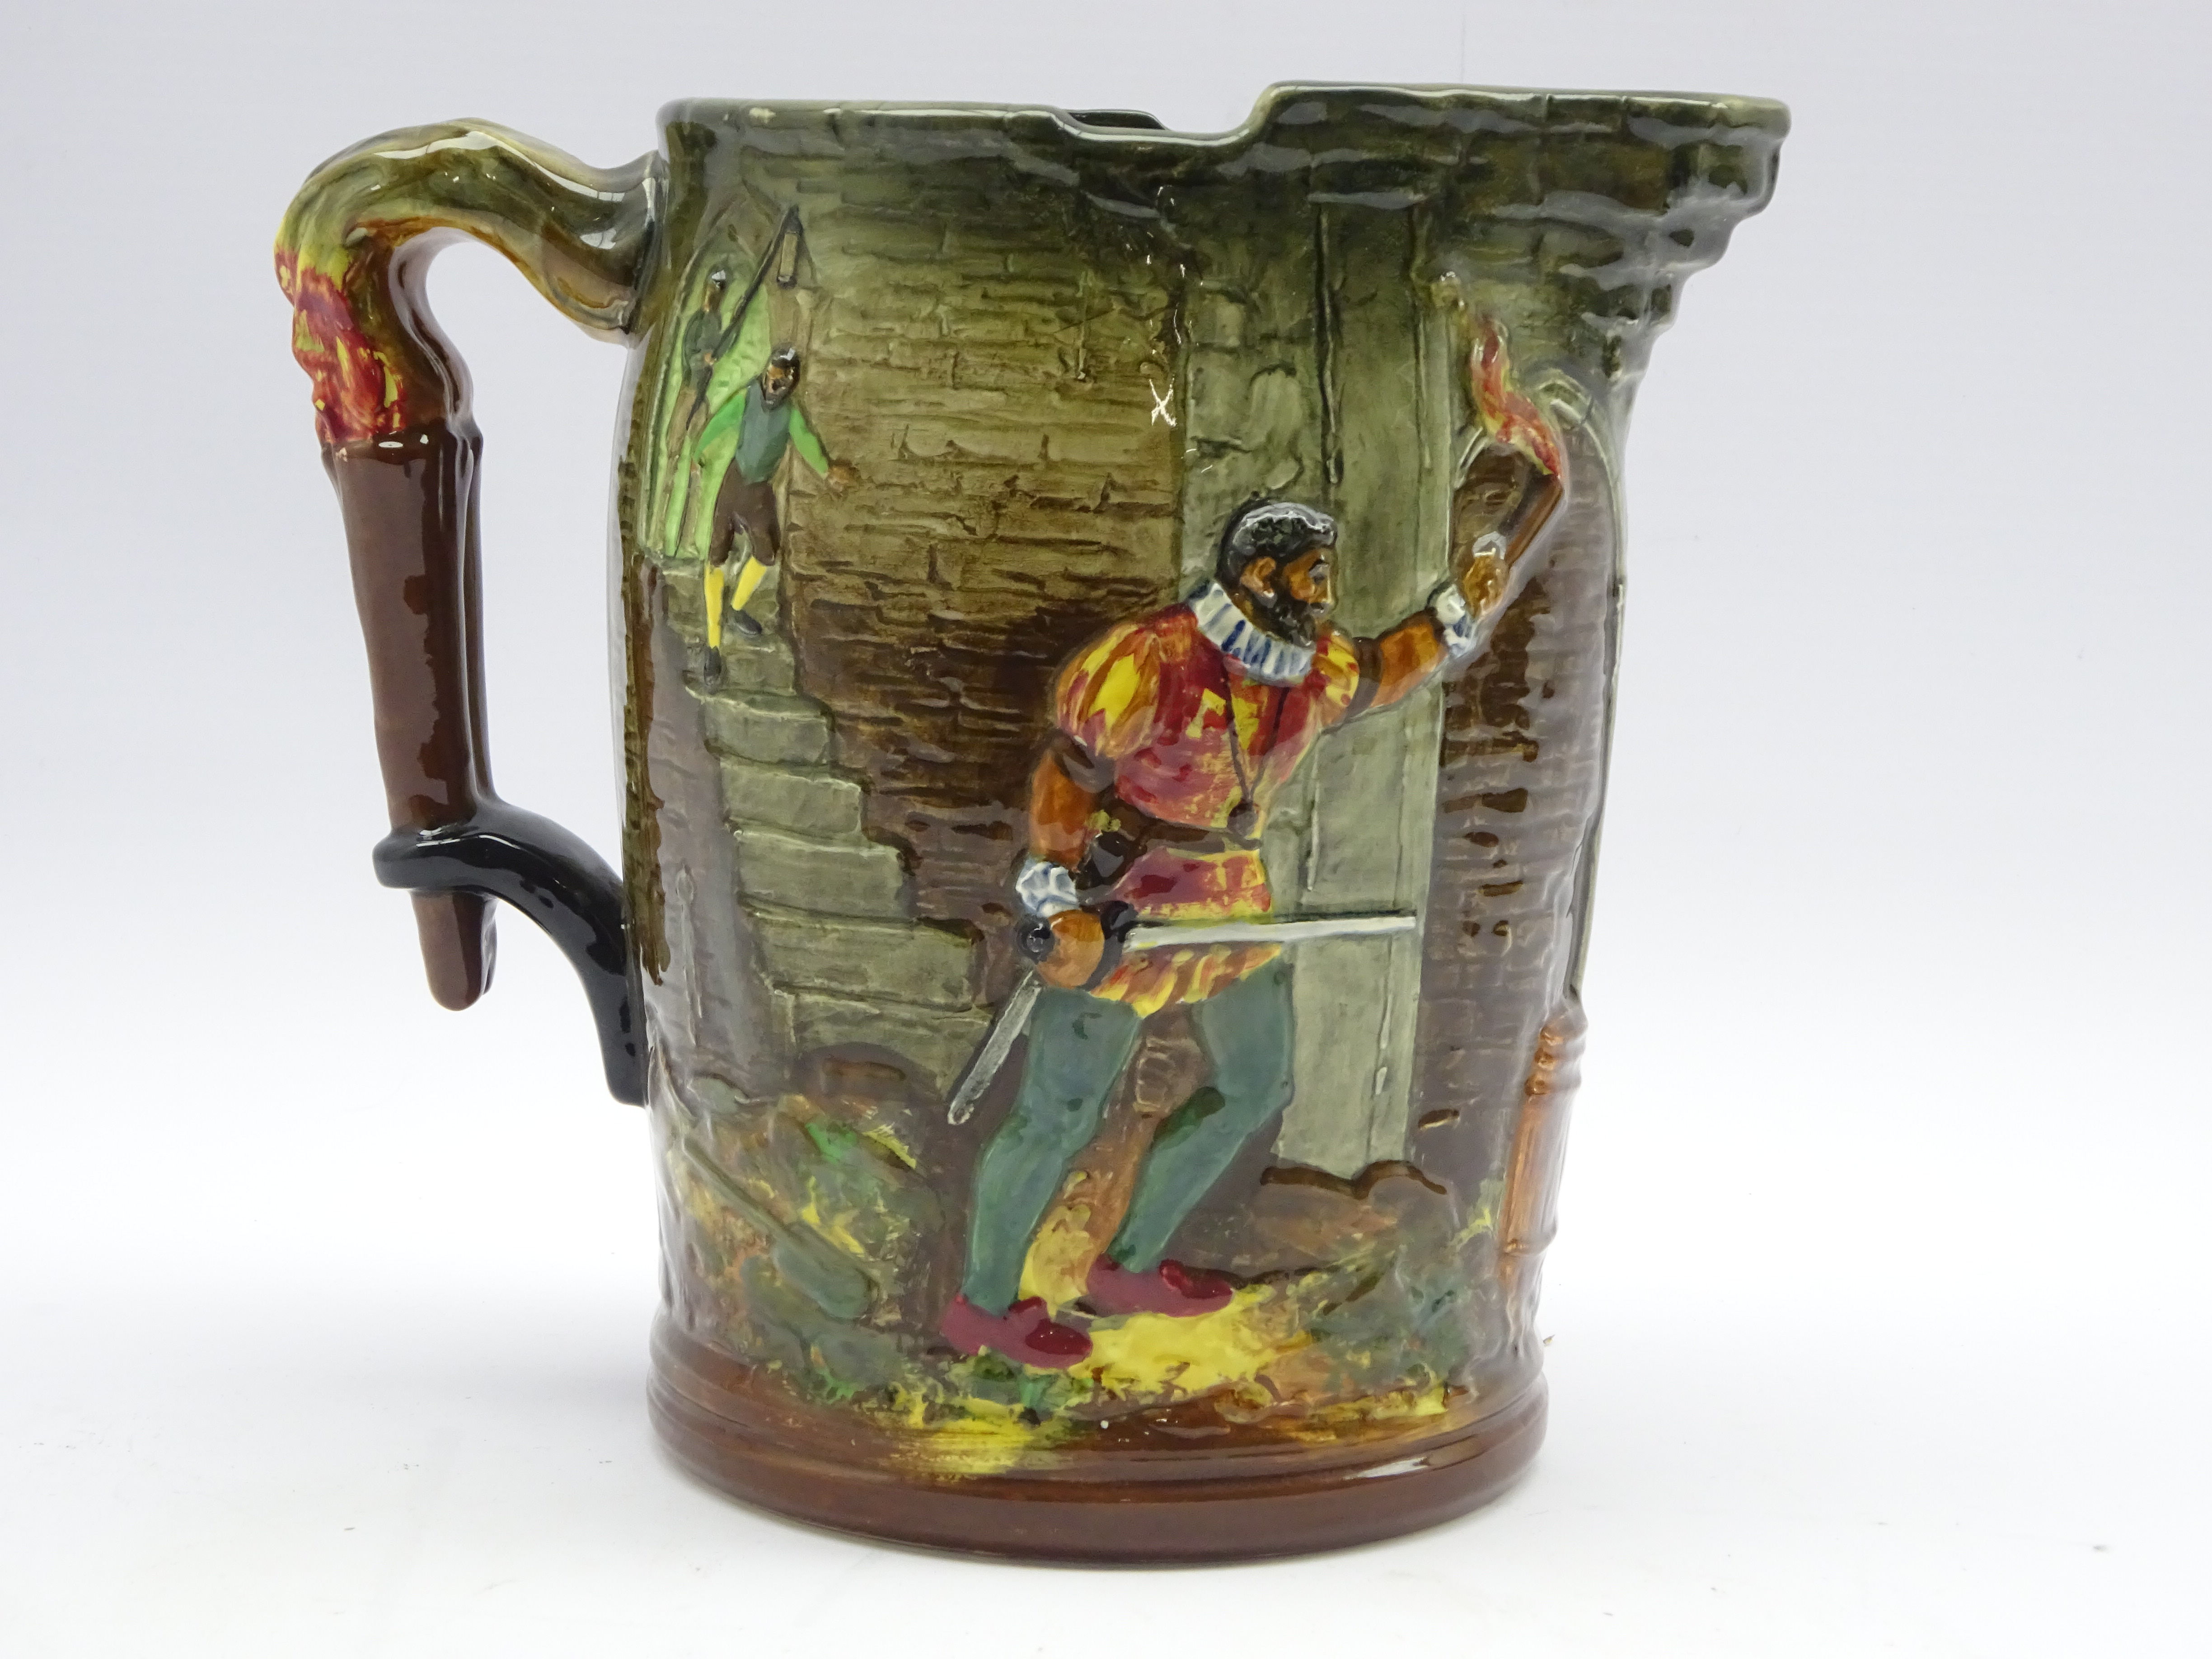 Royal Doulton limited edition 'Guy Fawkes' jug, designed by Harry Fenton, no. 250/600, H19.